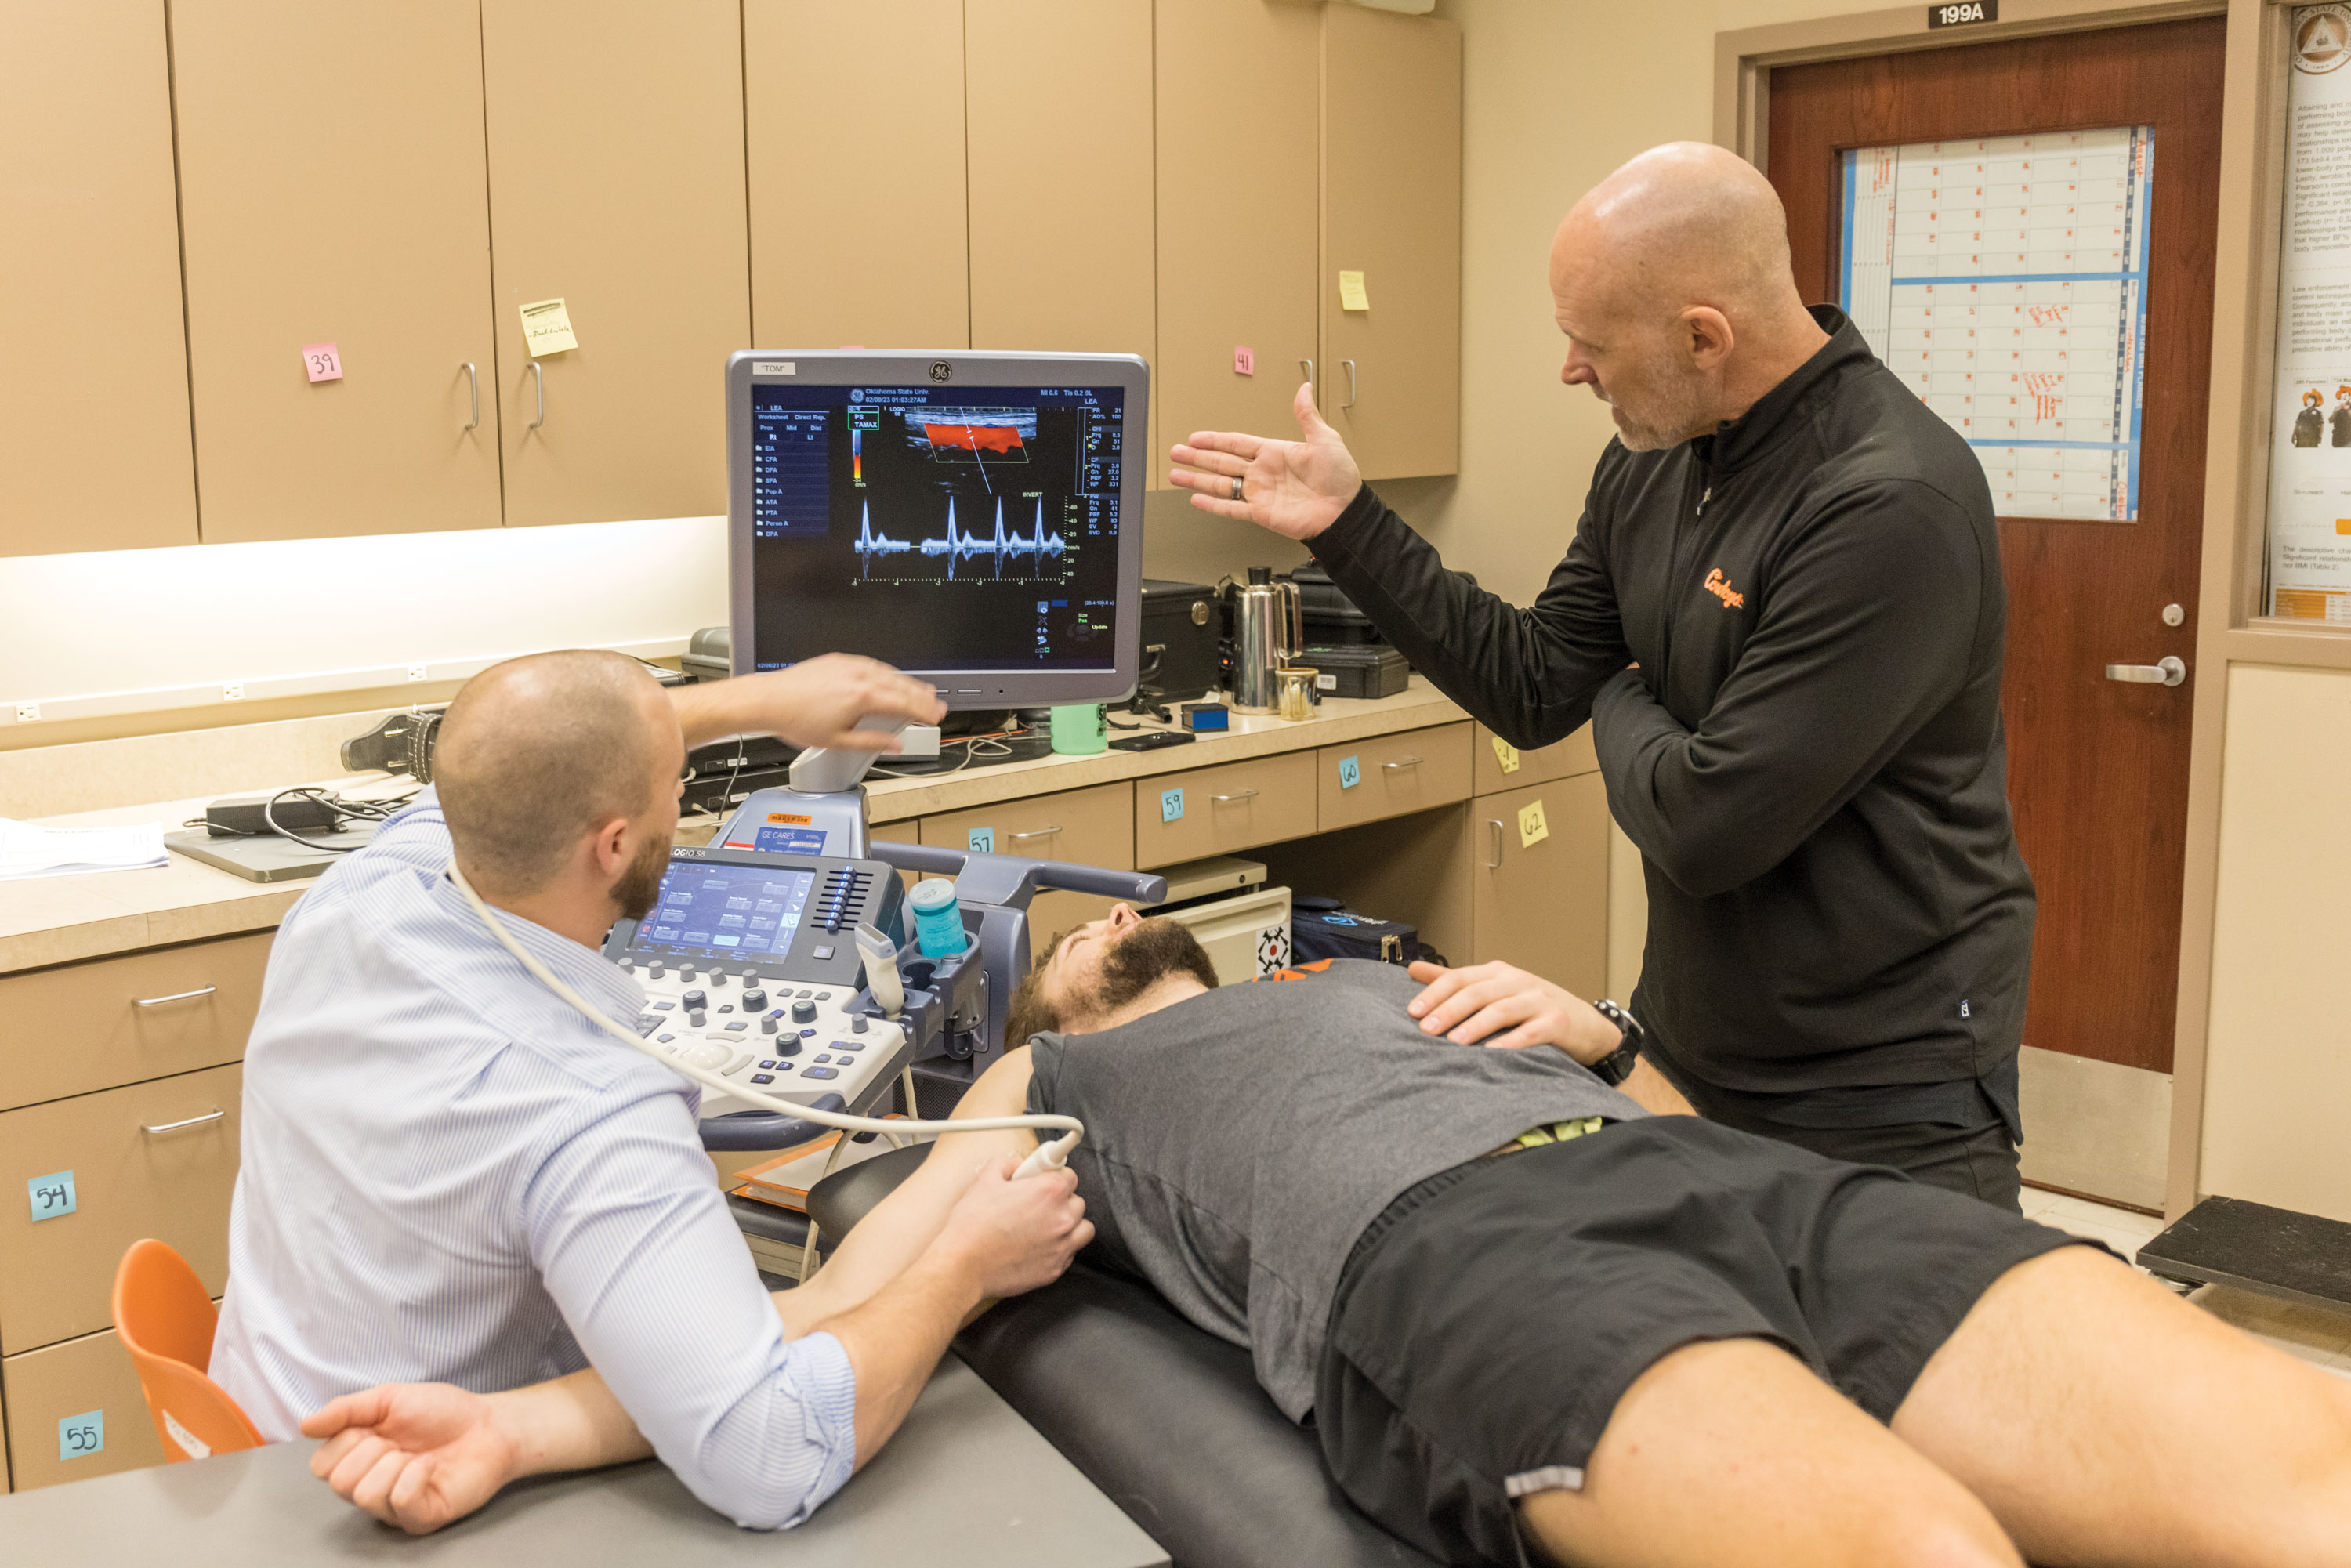 Dr. Shane Hammer conducts a diagnostic ultrasound to monitor blood flow at the Human Performance Lab located within the School of Kinesiology, Applied Health and Recreation. HPNRI connects experts like Hammer with other faculty members and units across the OSU System to advance research through a collaborative approach that emphasizes connectivity and transdisciplinary research.